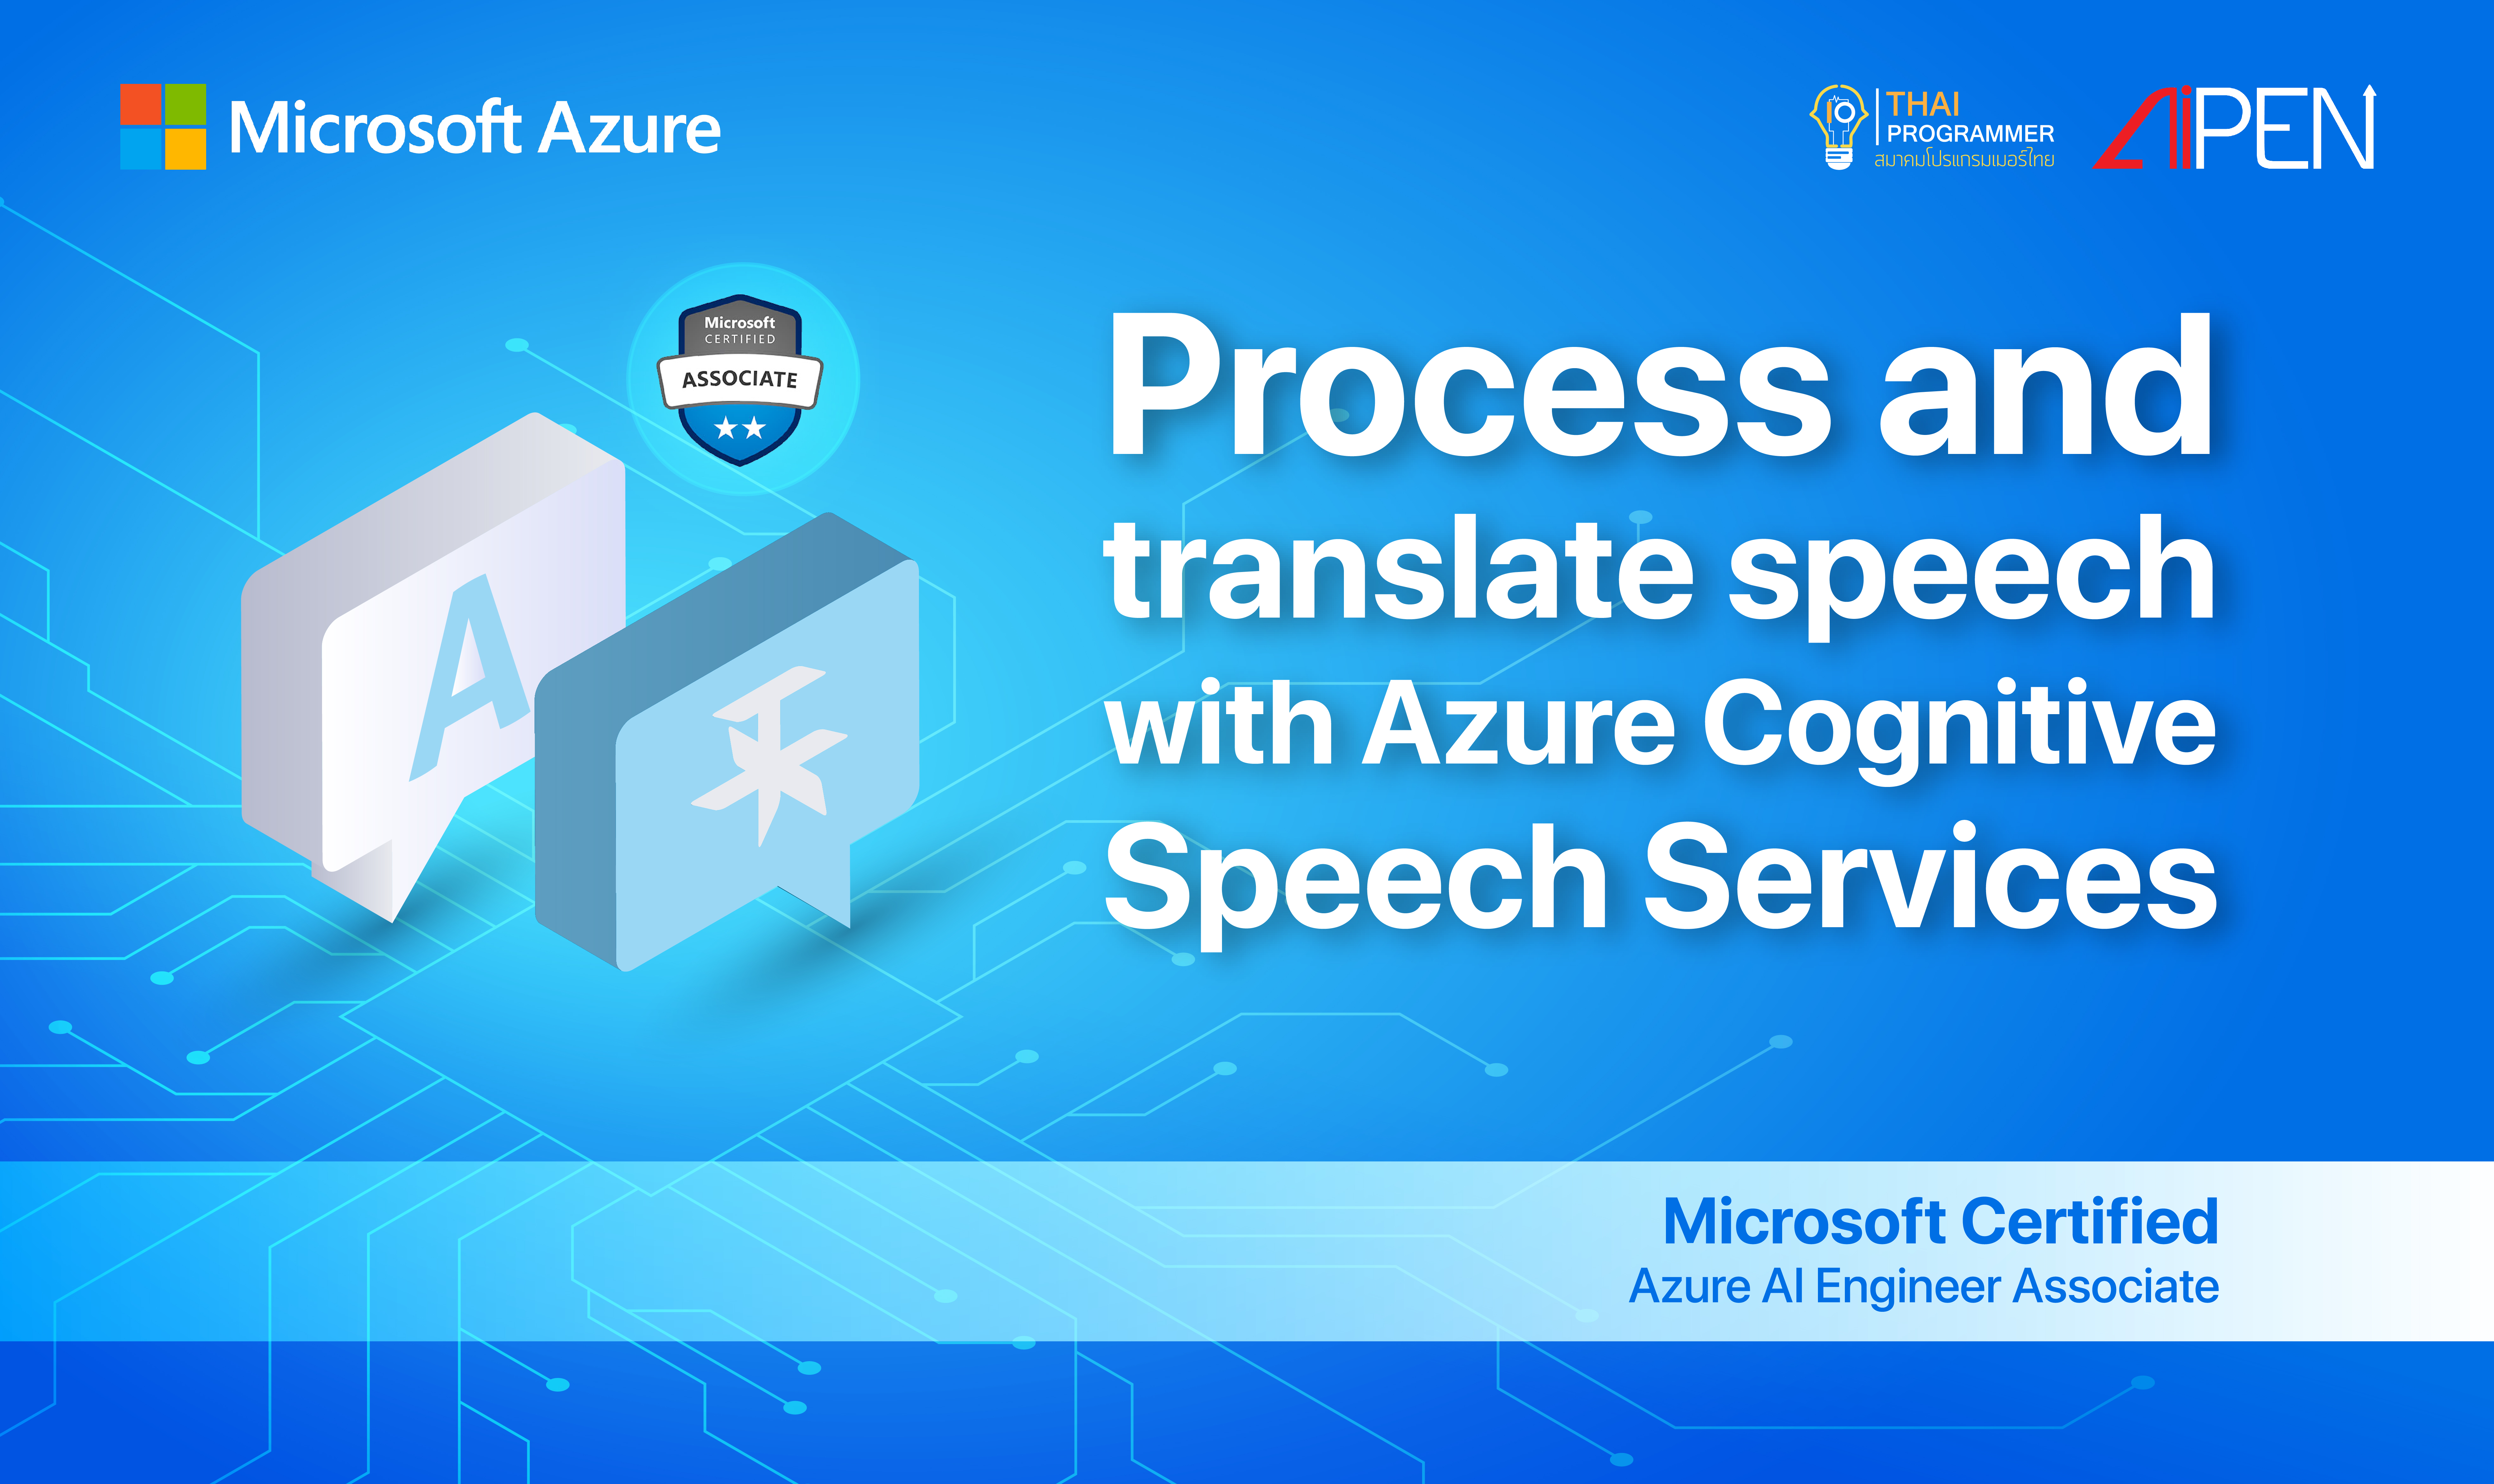 Microsoft Azure : Process and translate speech with Azure Cognitive Speech Services